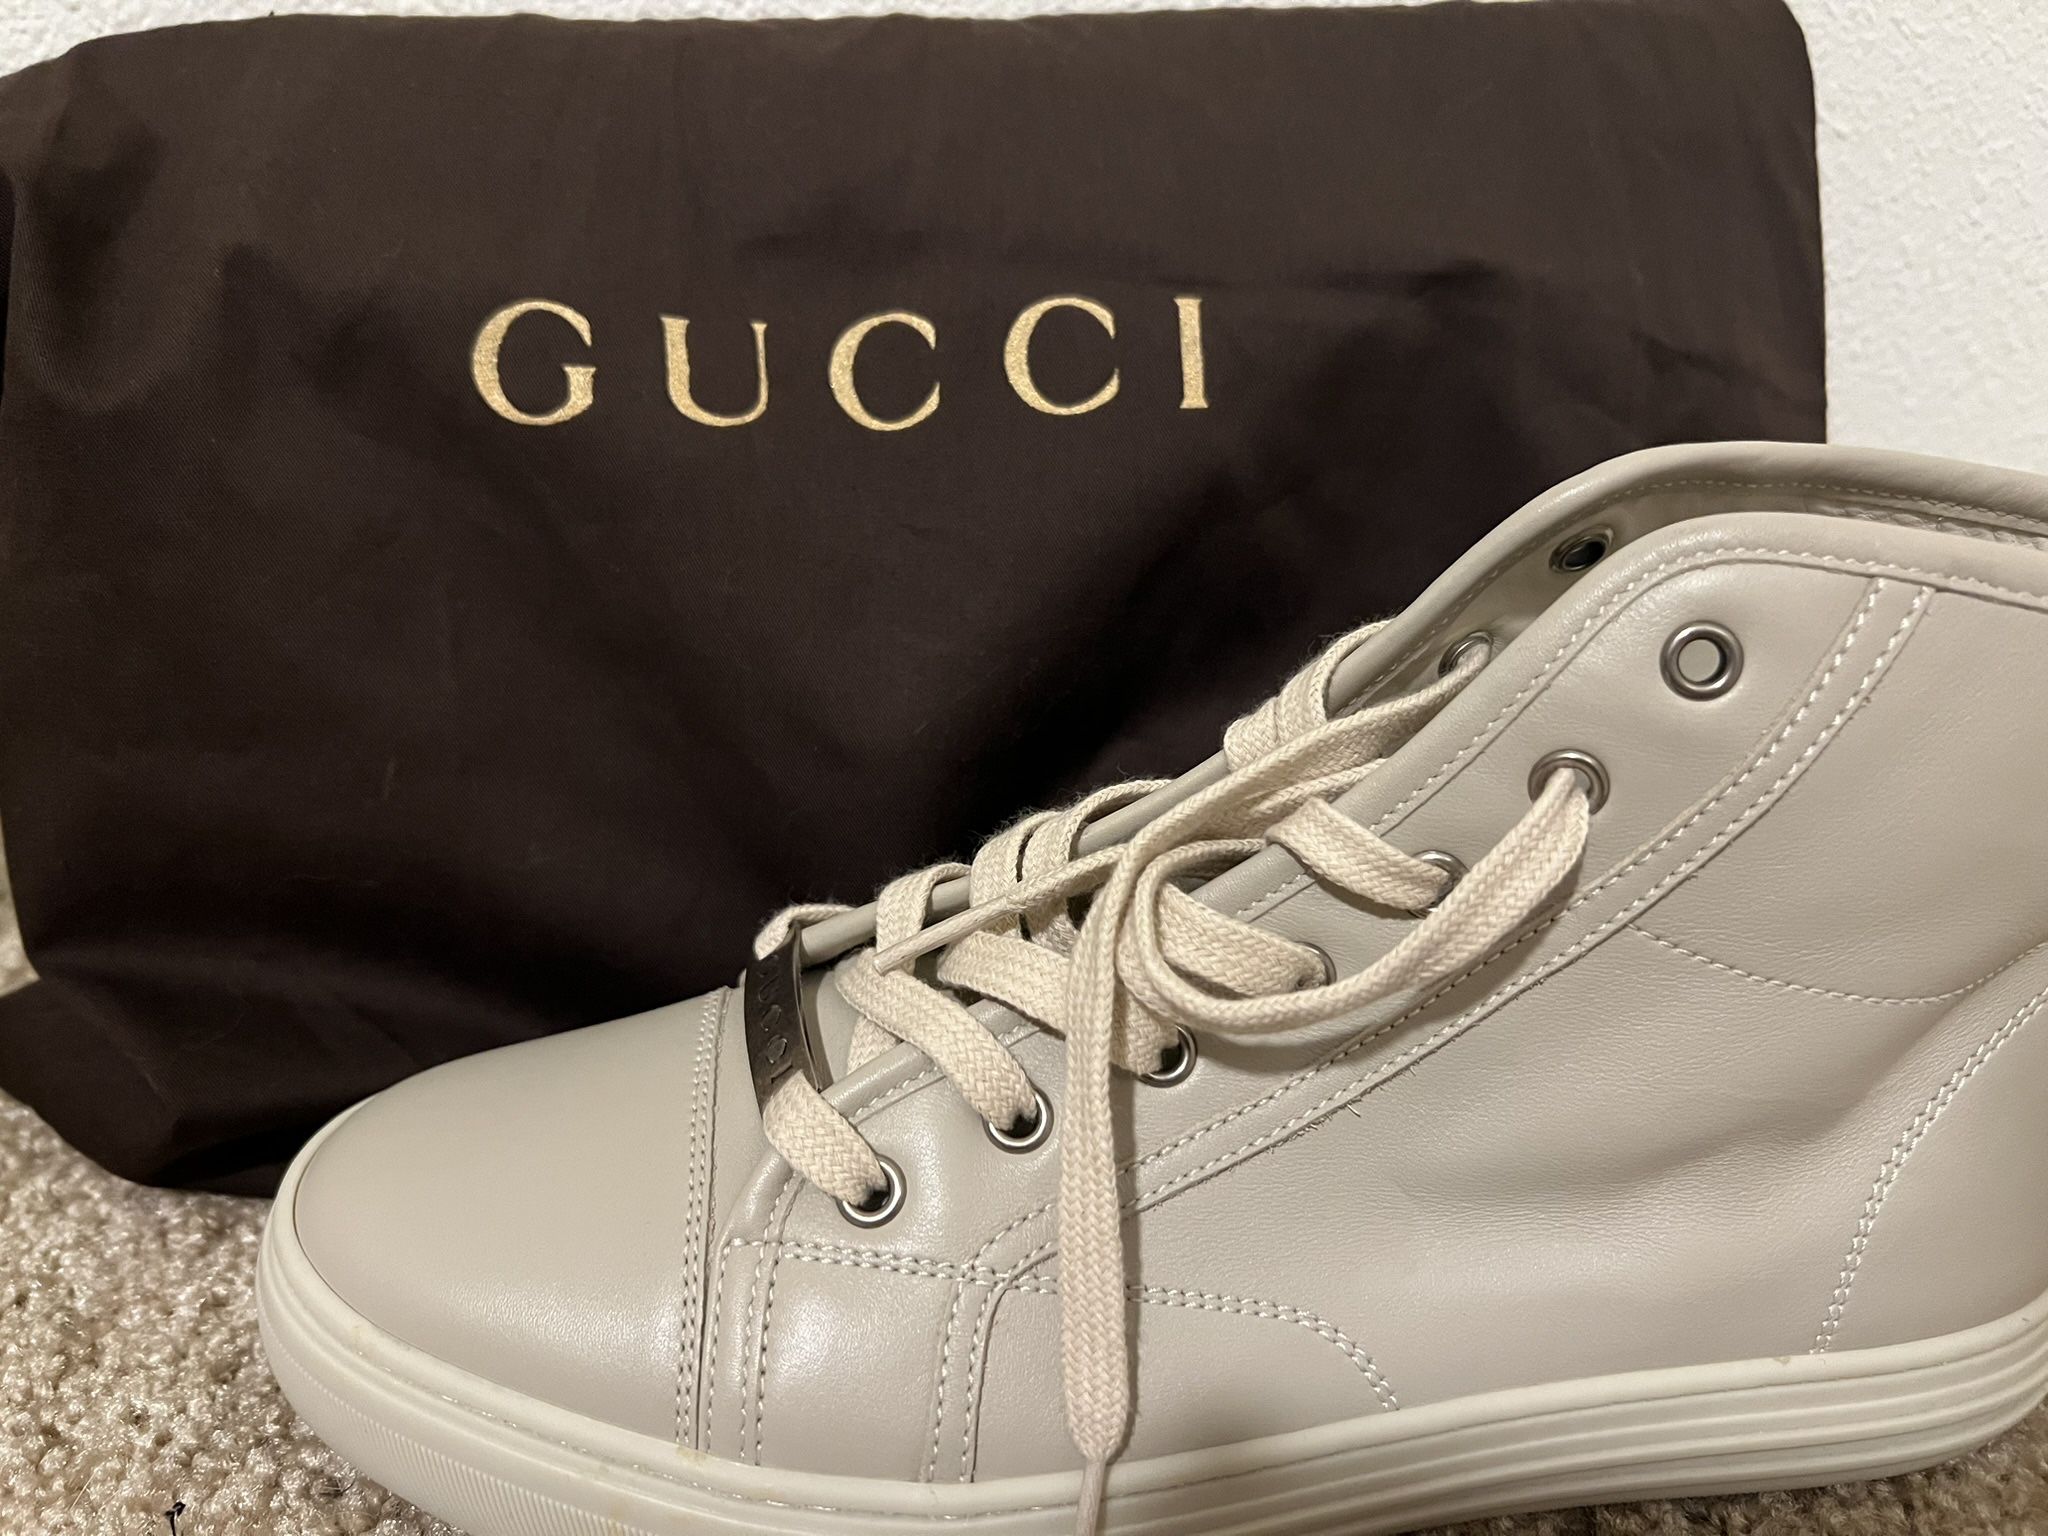 Authentic Gucci Leather High Top Sneakers